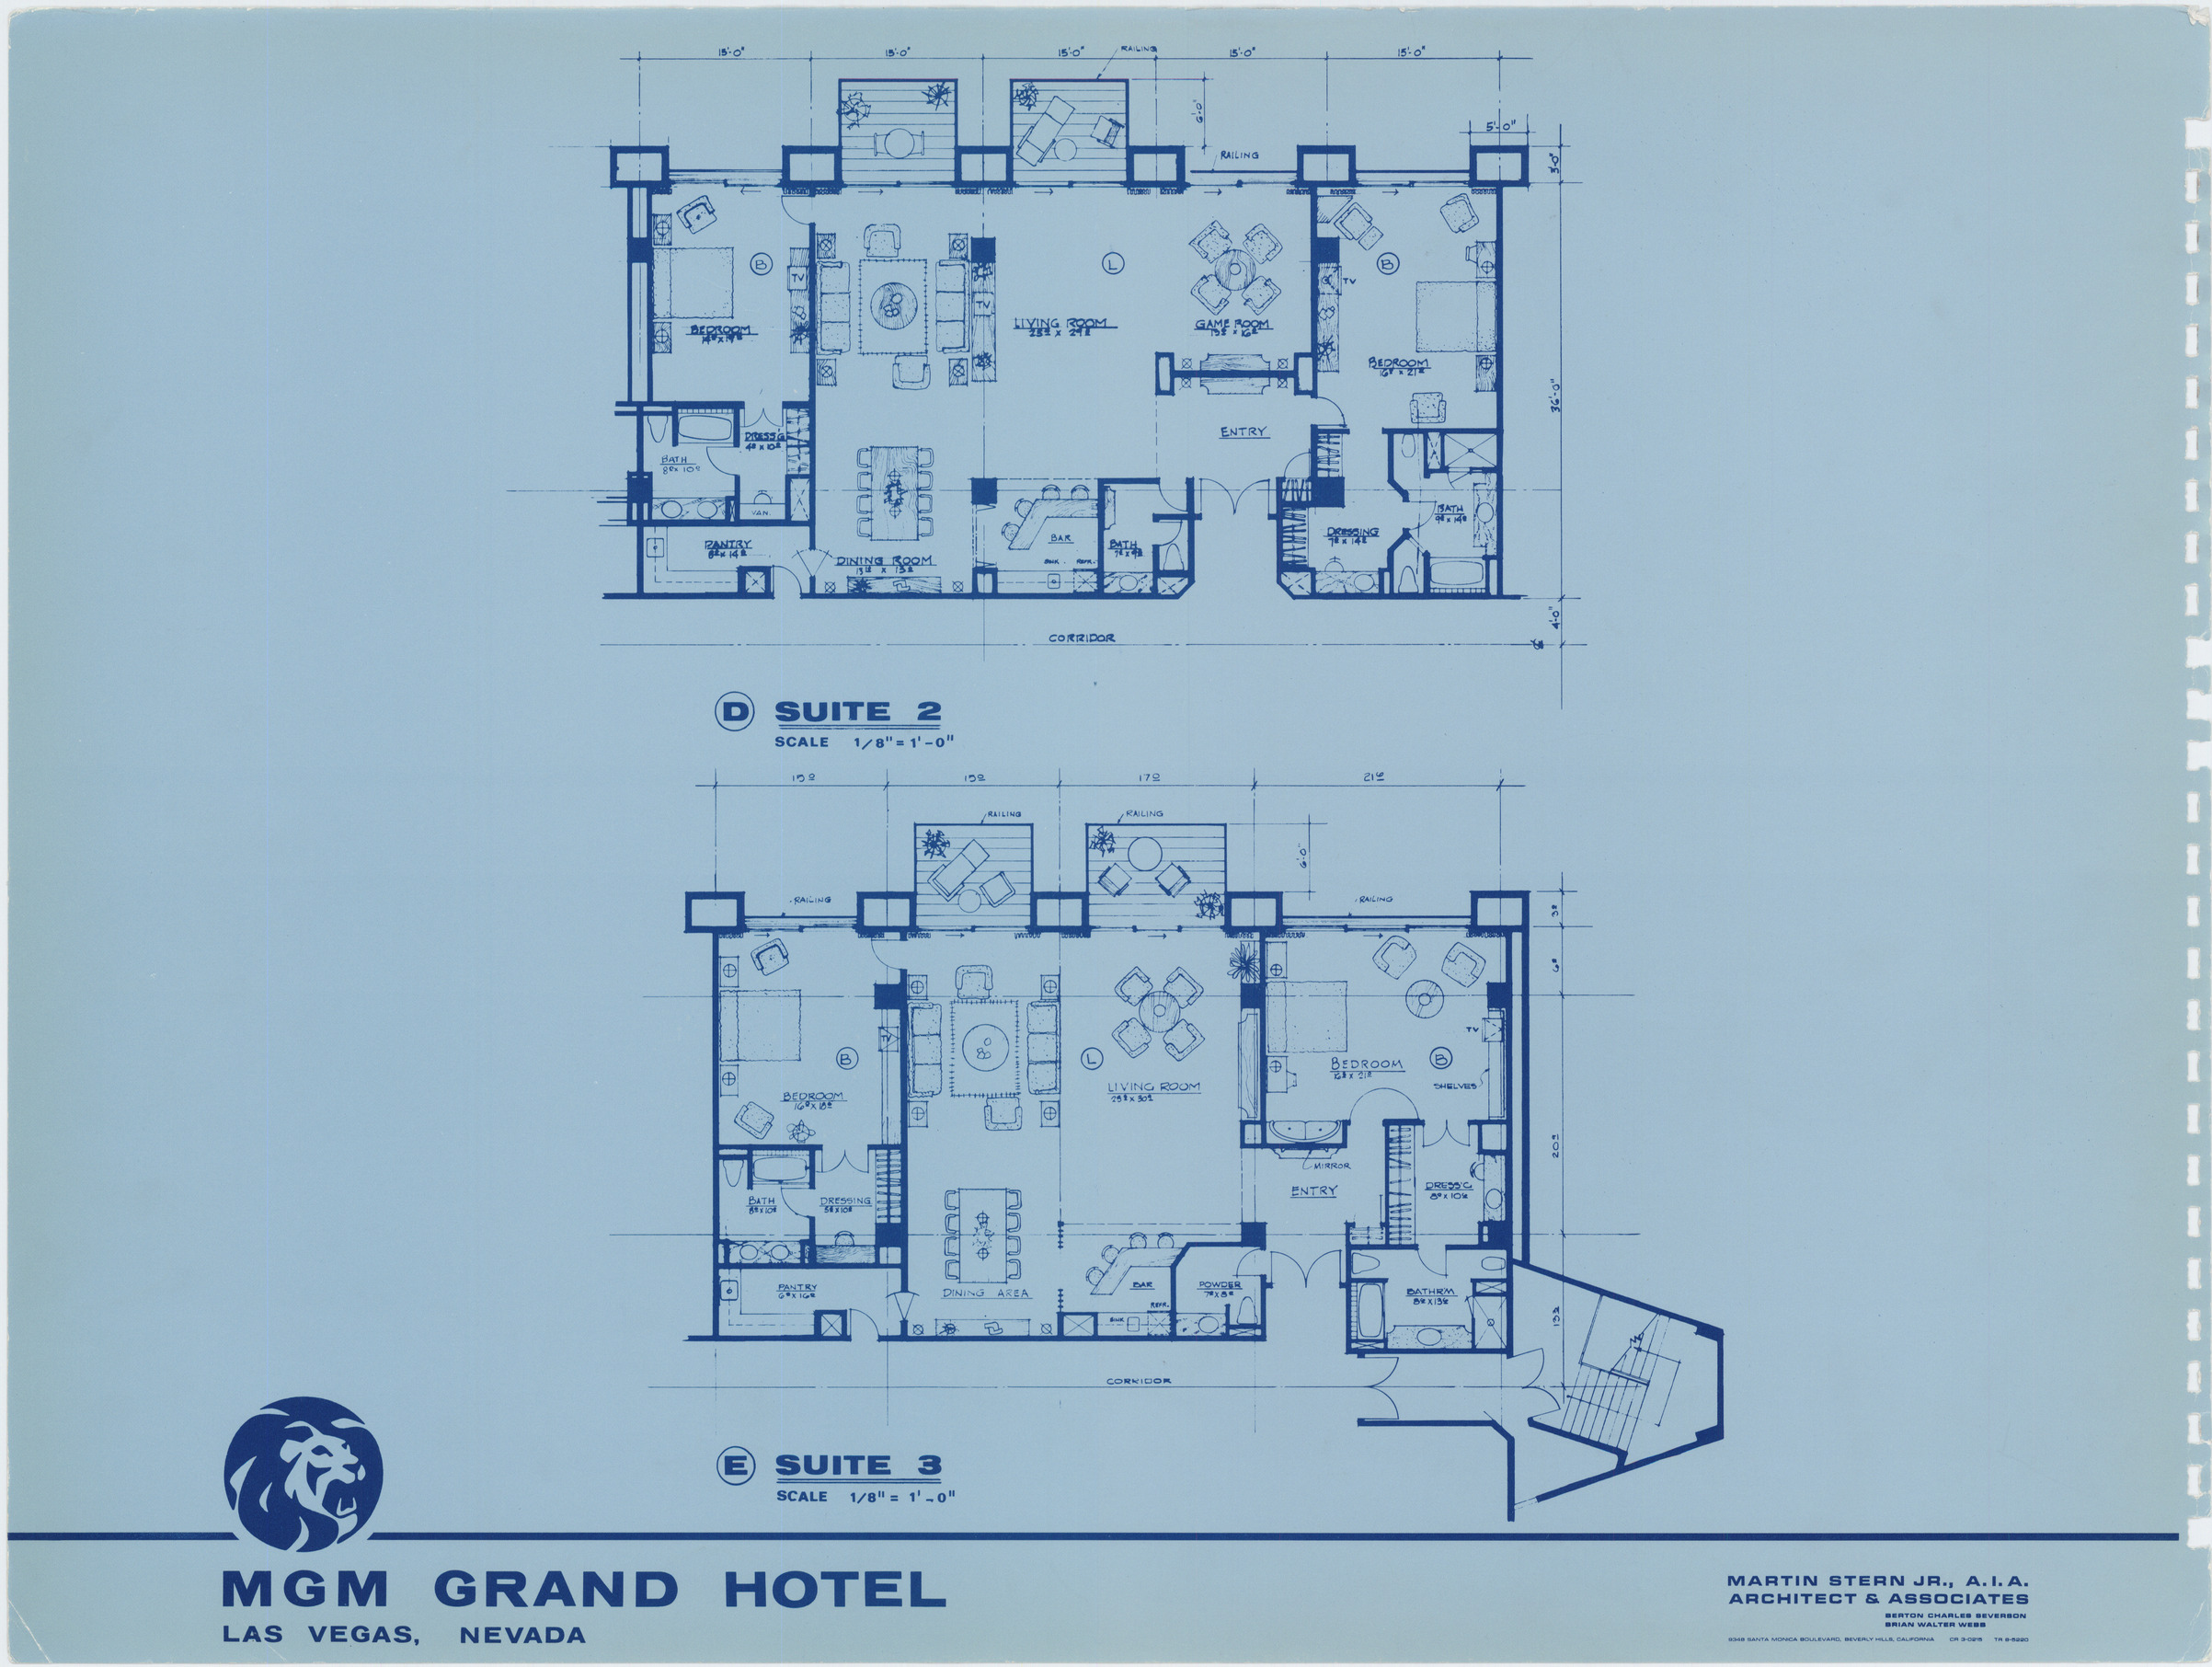 Proposal for the MGM Grand Hotel (Las Vegas), circa 1972, image 15